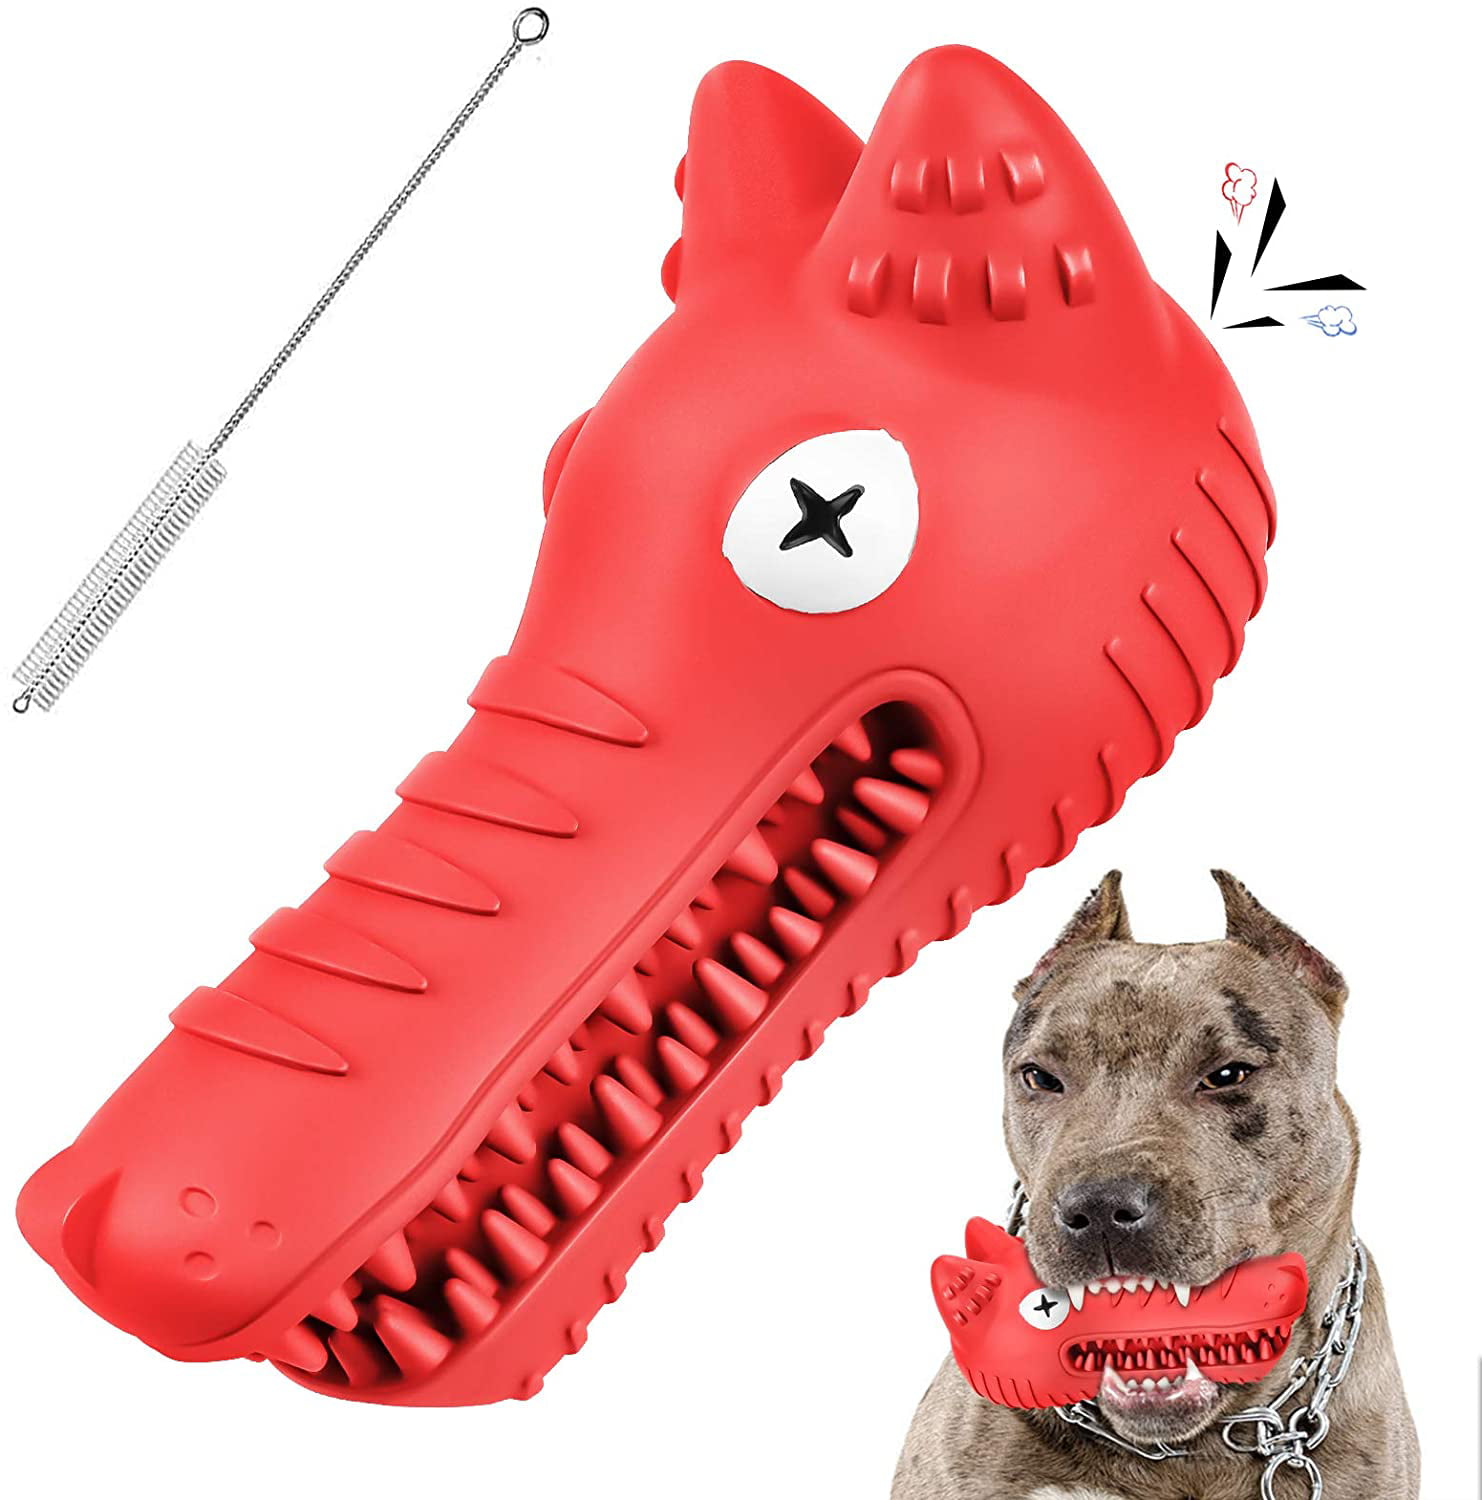 Interactive Dog Toys for Large/Medium Dog Green Dog Chew Toys Dinosaur Tough Toys for Training and Cleaning Teeth Indestructible Durable Rubber Dog Toys for Aggressive Chewers